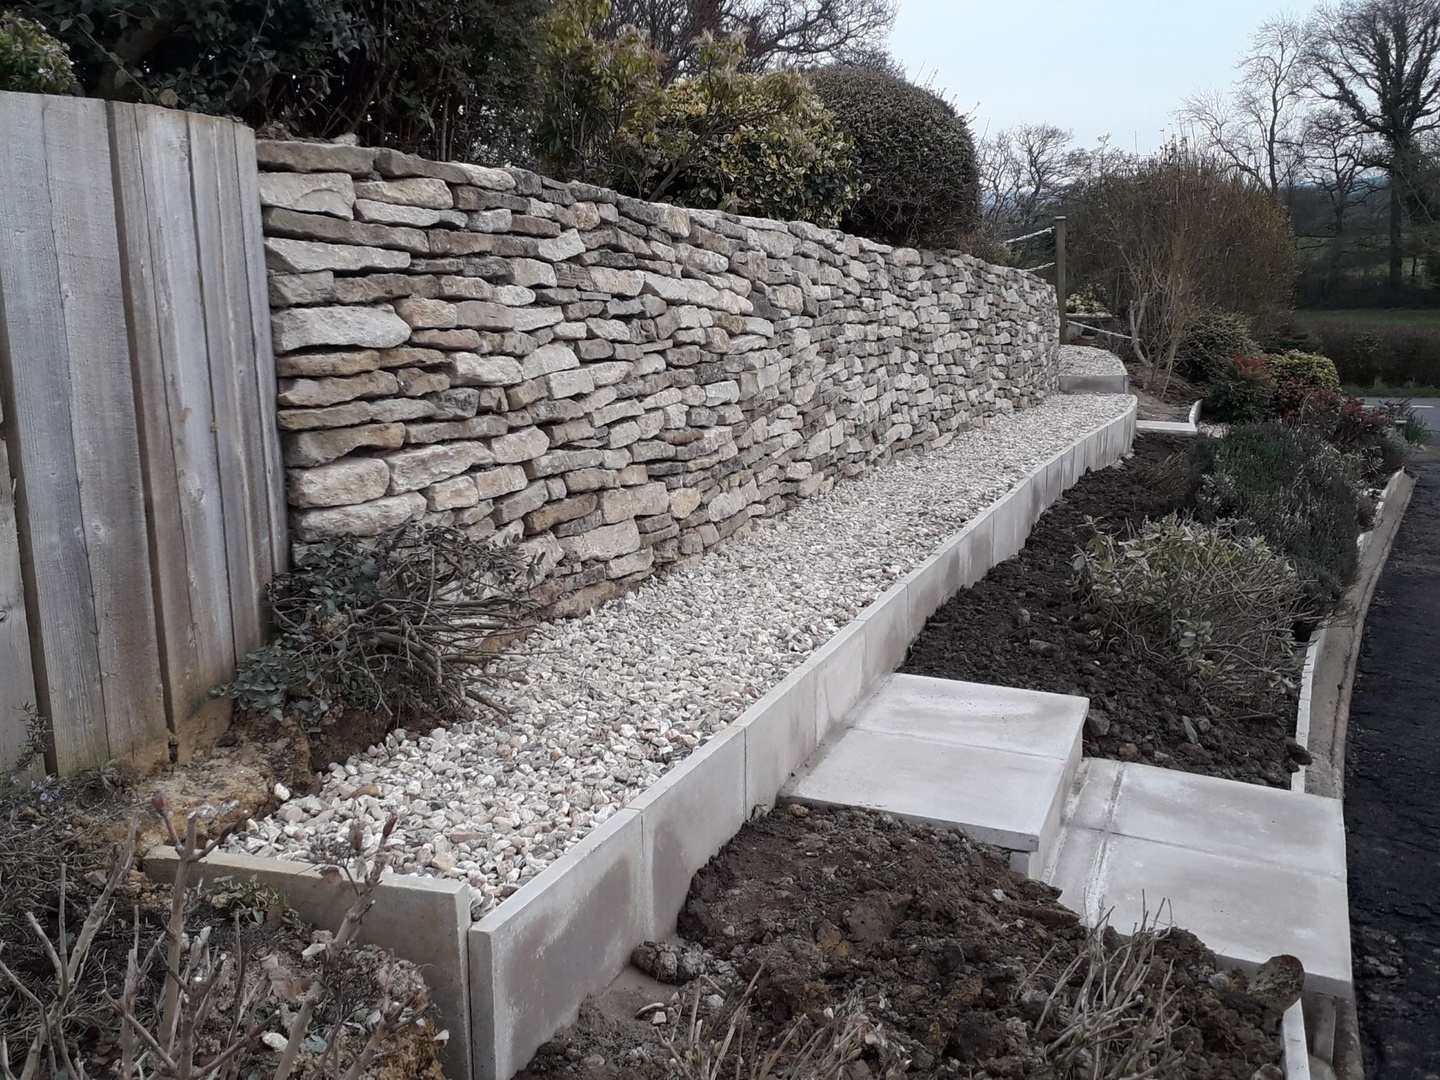 Wall rebuilt, bank made accessible, kerbing added